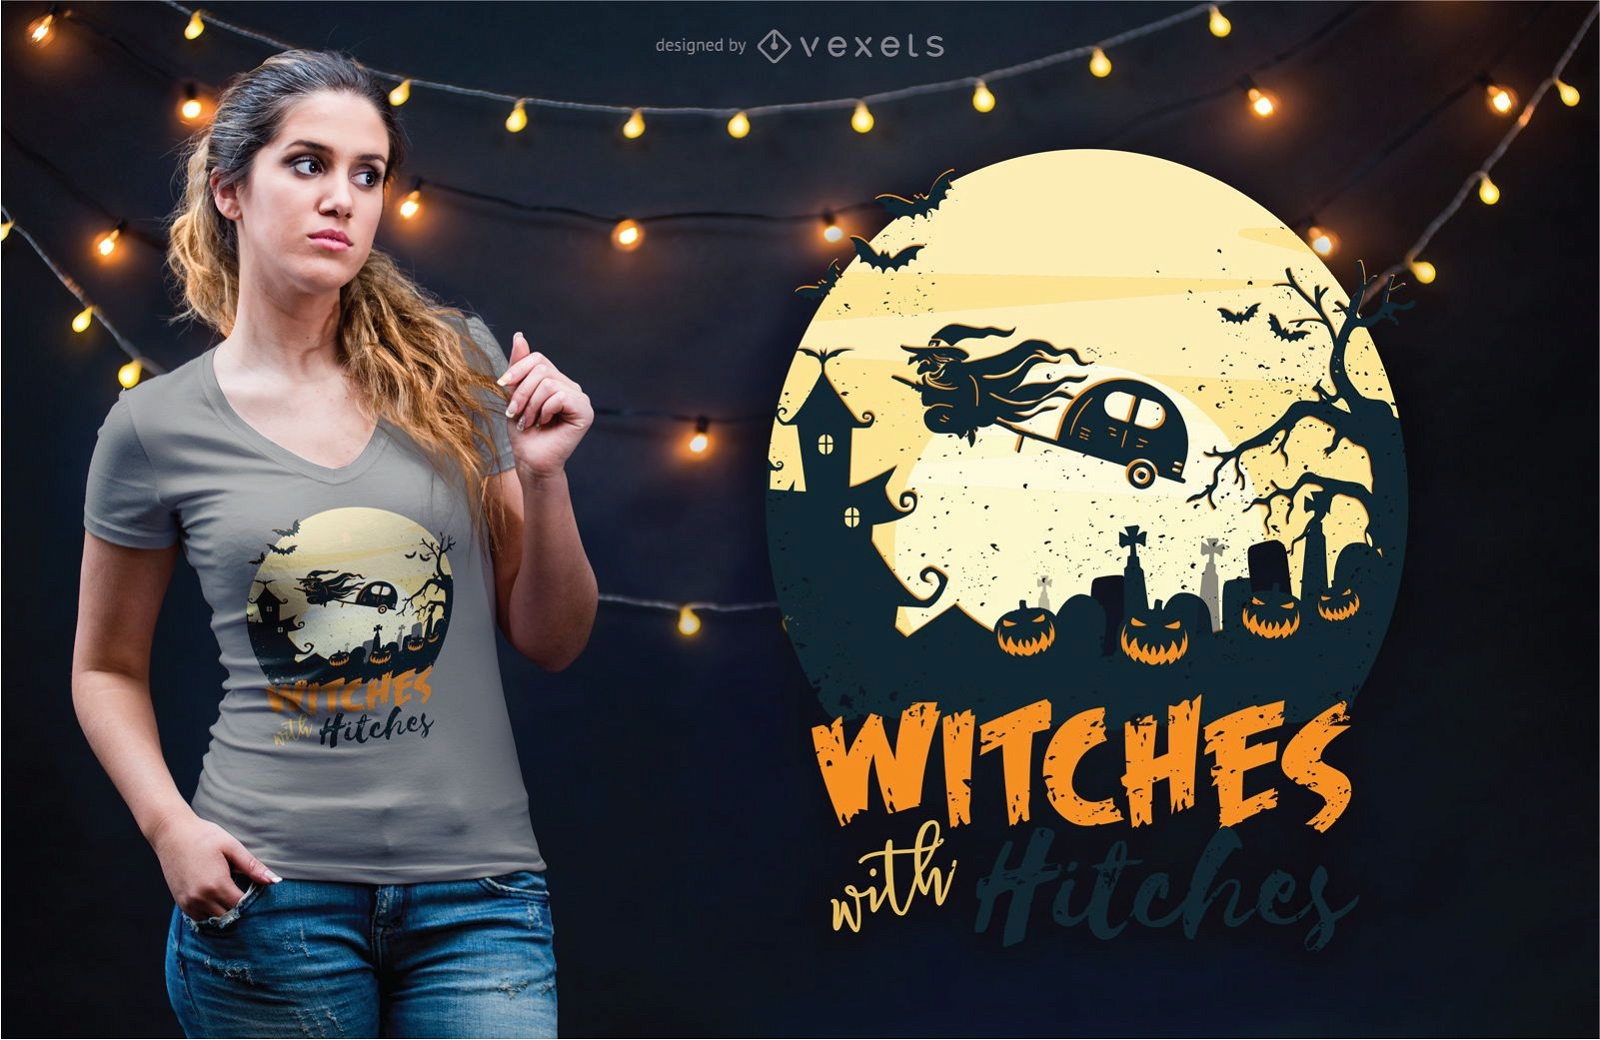 Witches with hitches t-shirt design